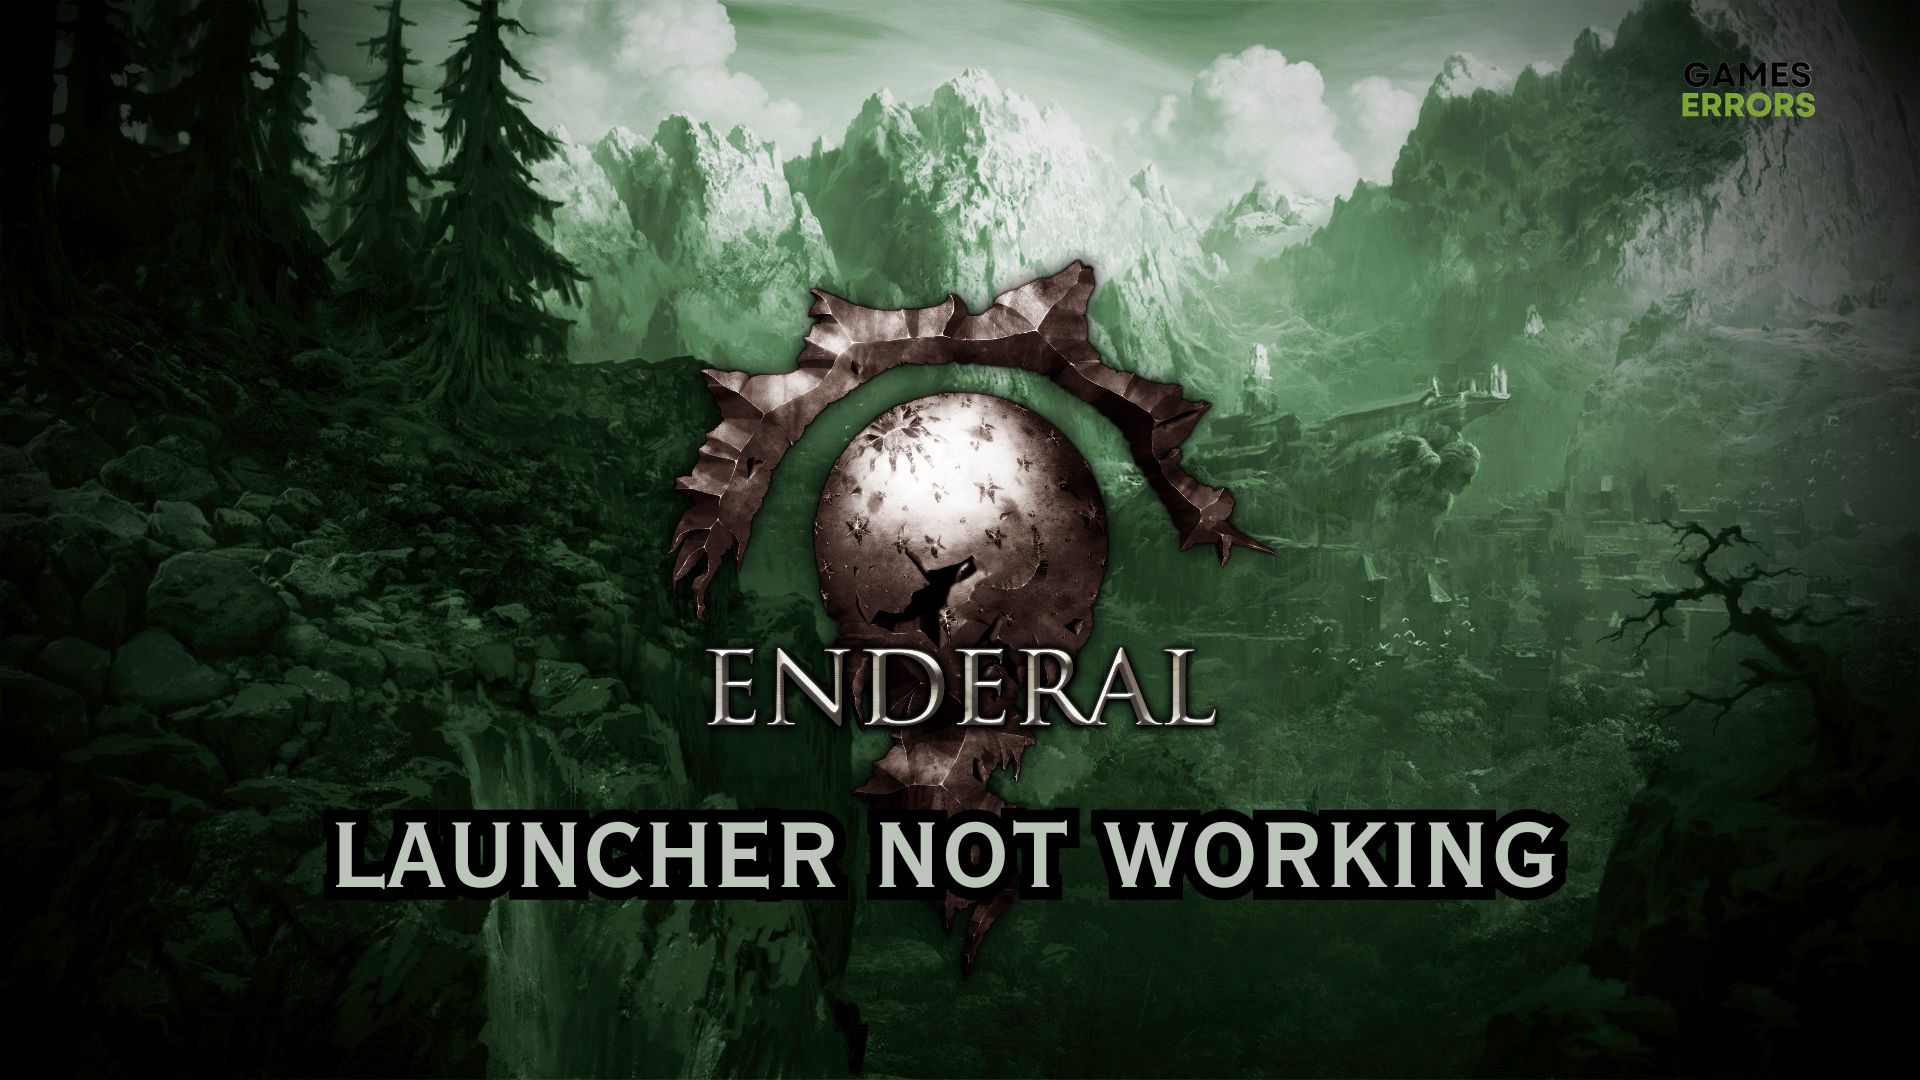 Enderal Launcher Is Not Working: Use This Easy Guide